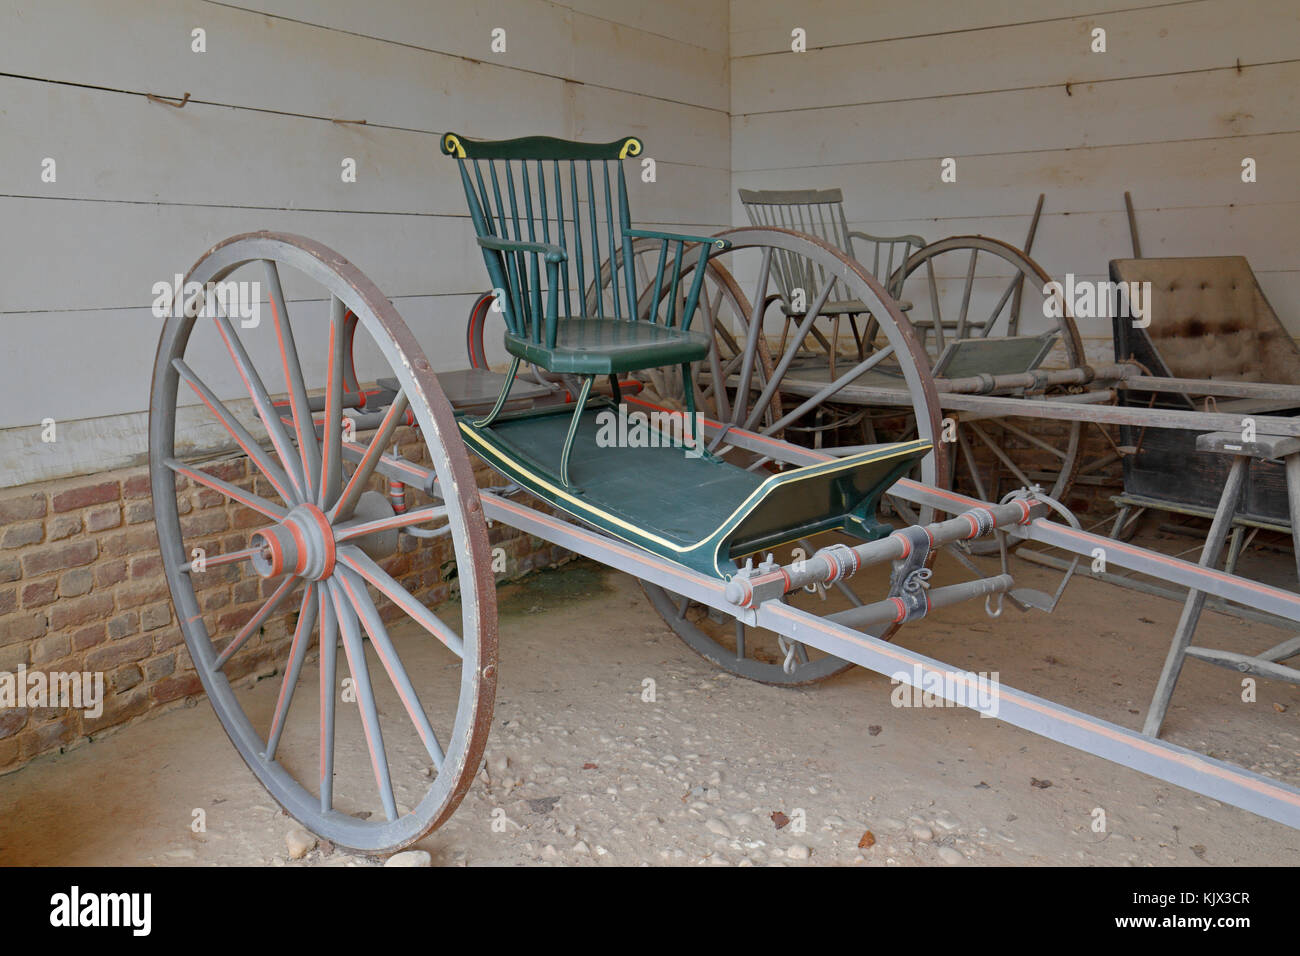 A horse drawn riding chair carriage of the type used by George Washington on the Mount Vernon estate, Alexandria, Virginia. Stock Photo